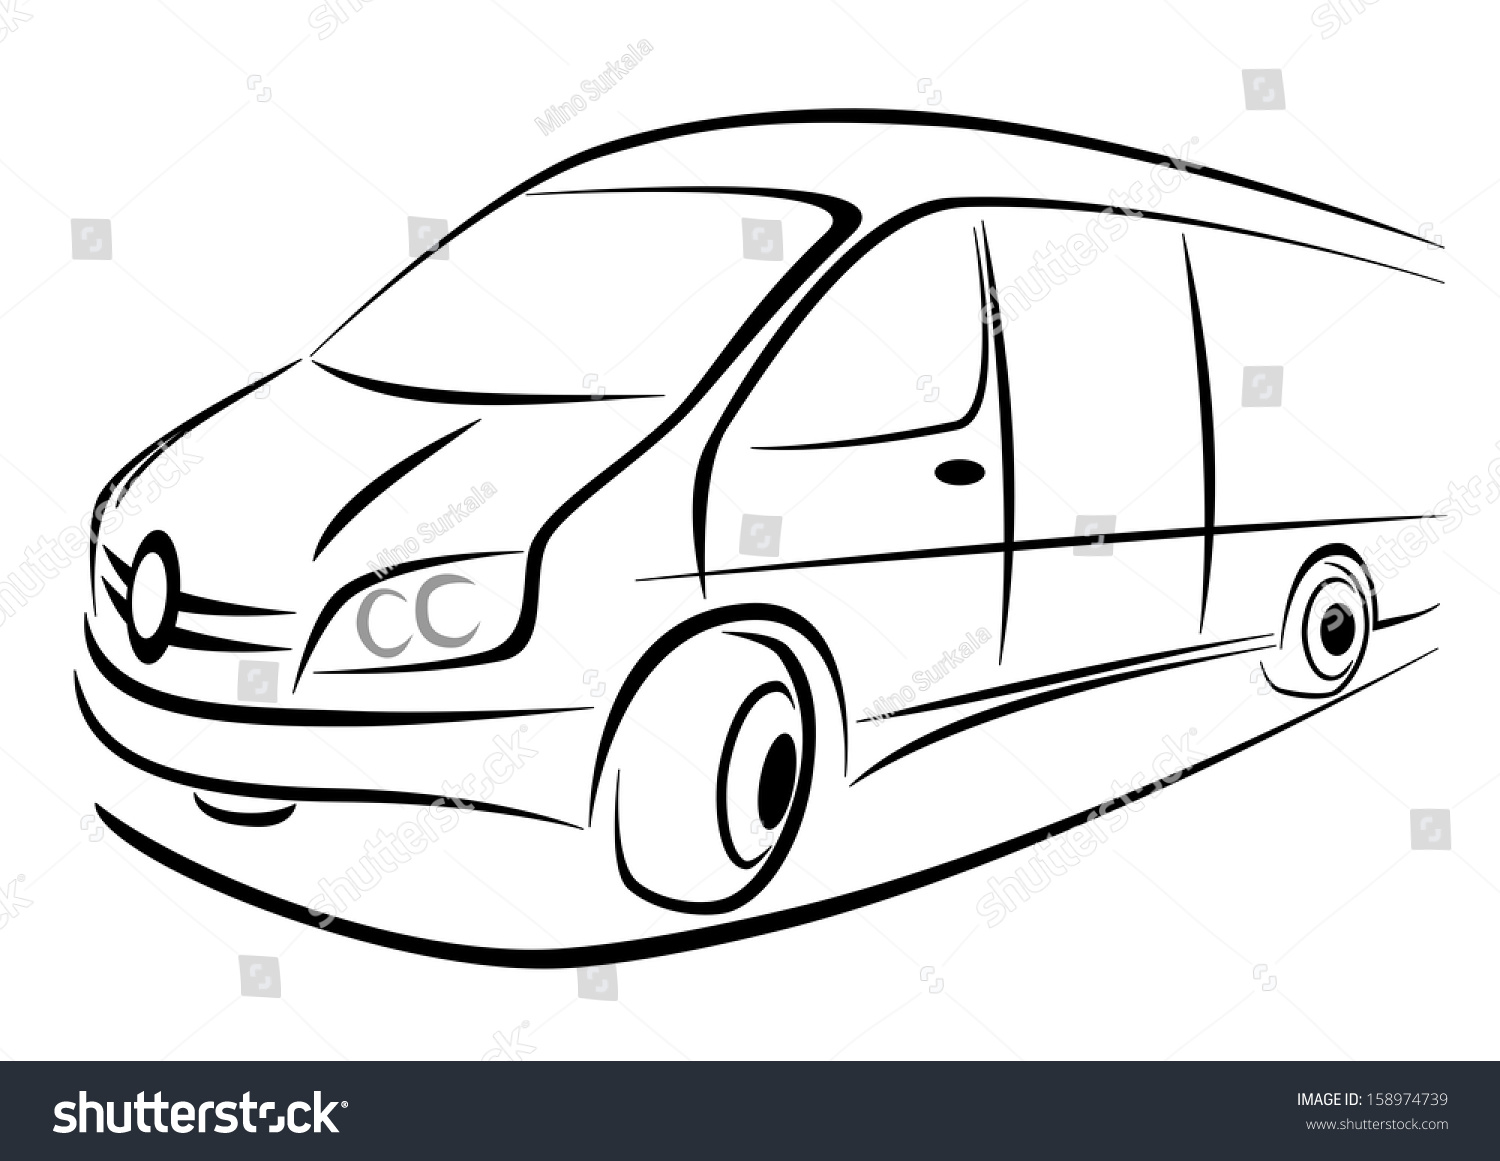 Design Of A White Van In Strong Perspective View Stock Vector ...